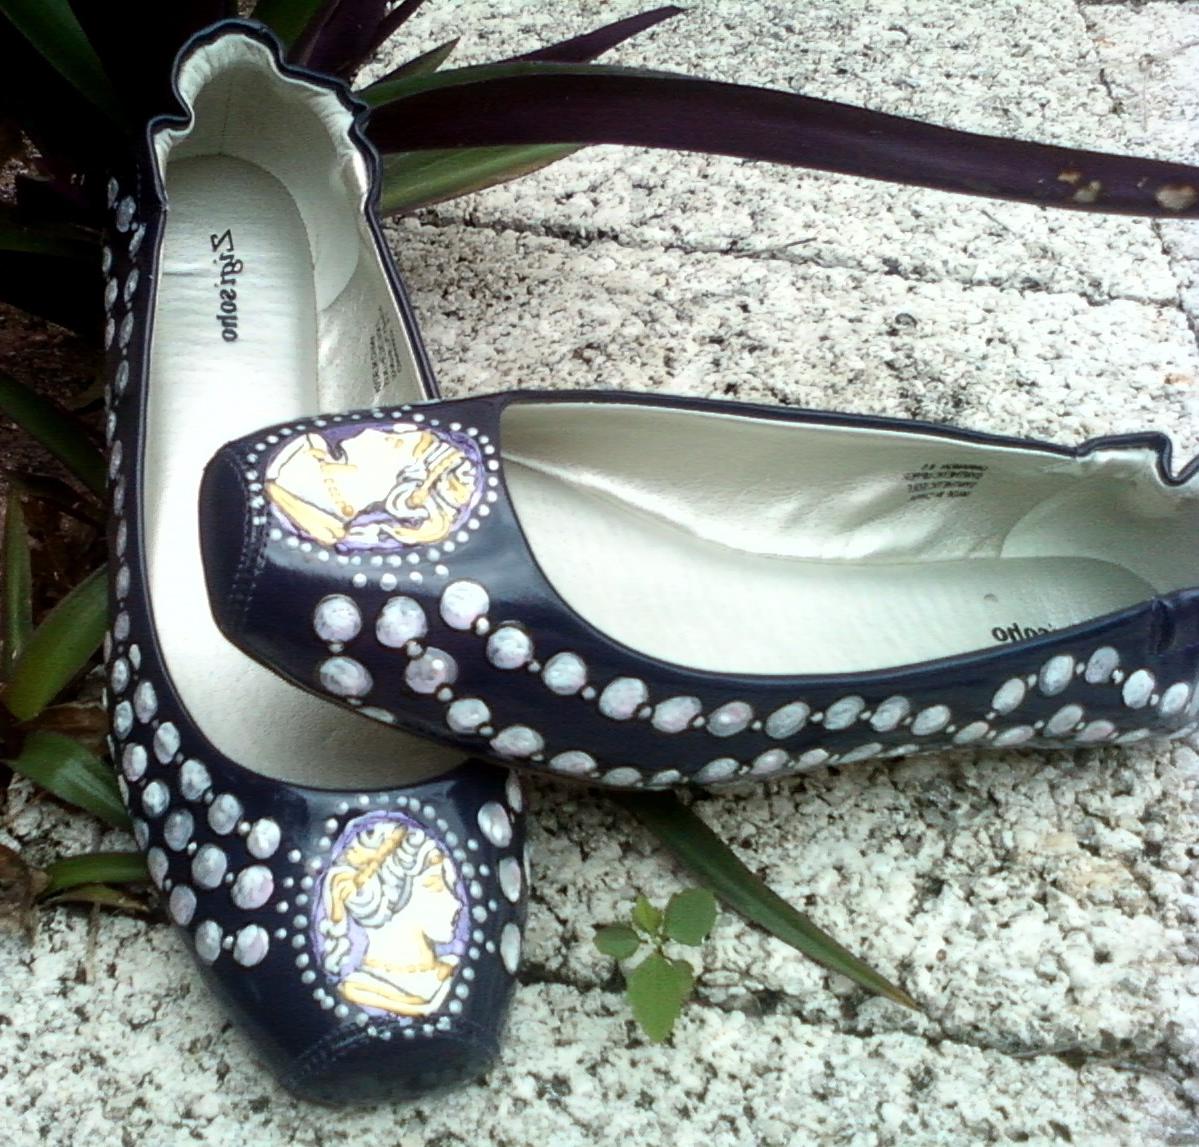 Wedding Shoes Cameos and Pearls painted colored flats. From norakaren